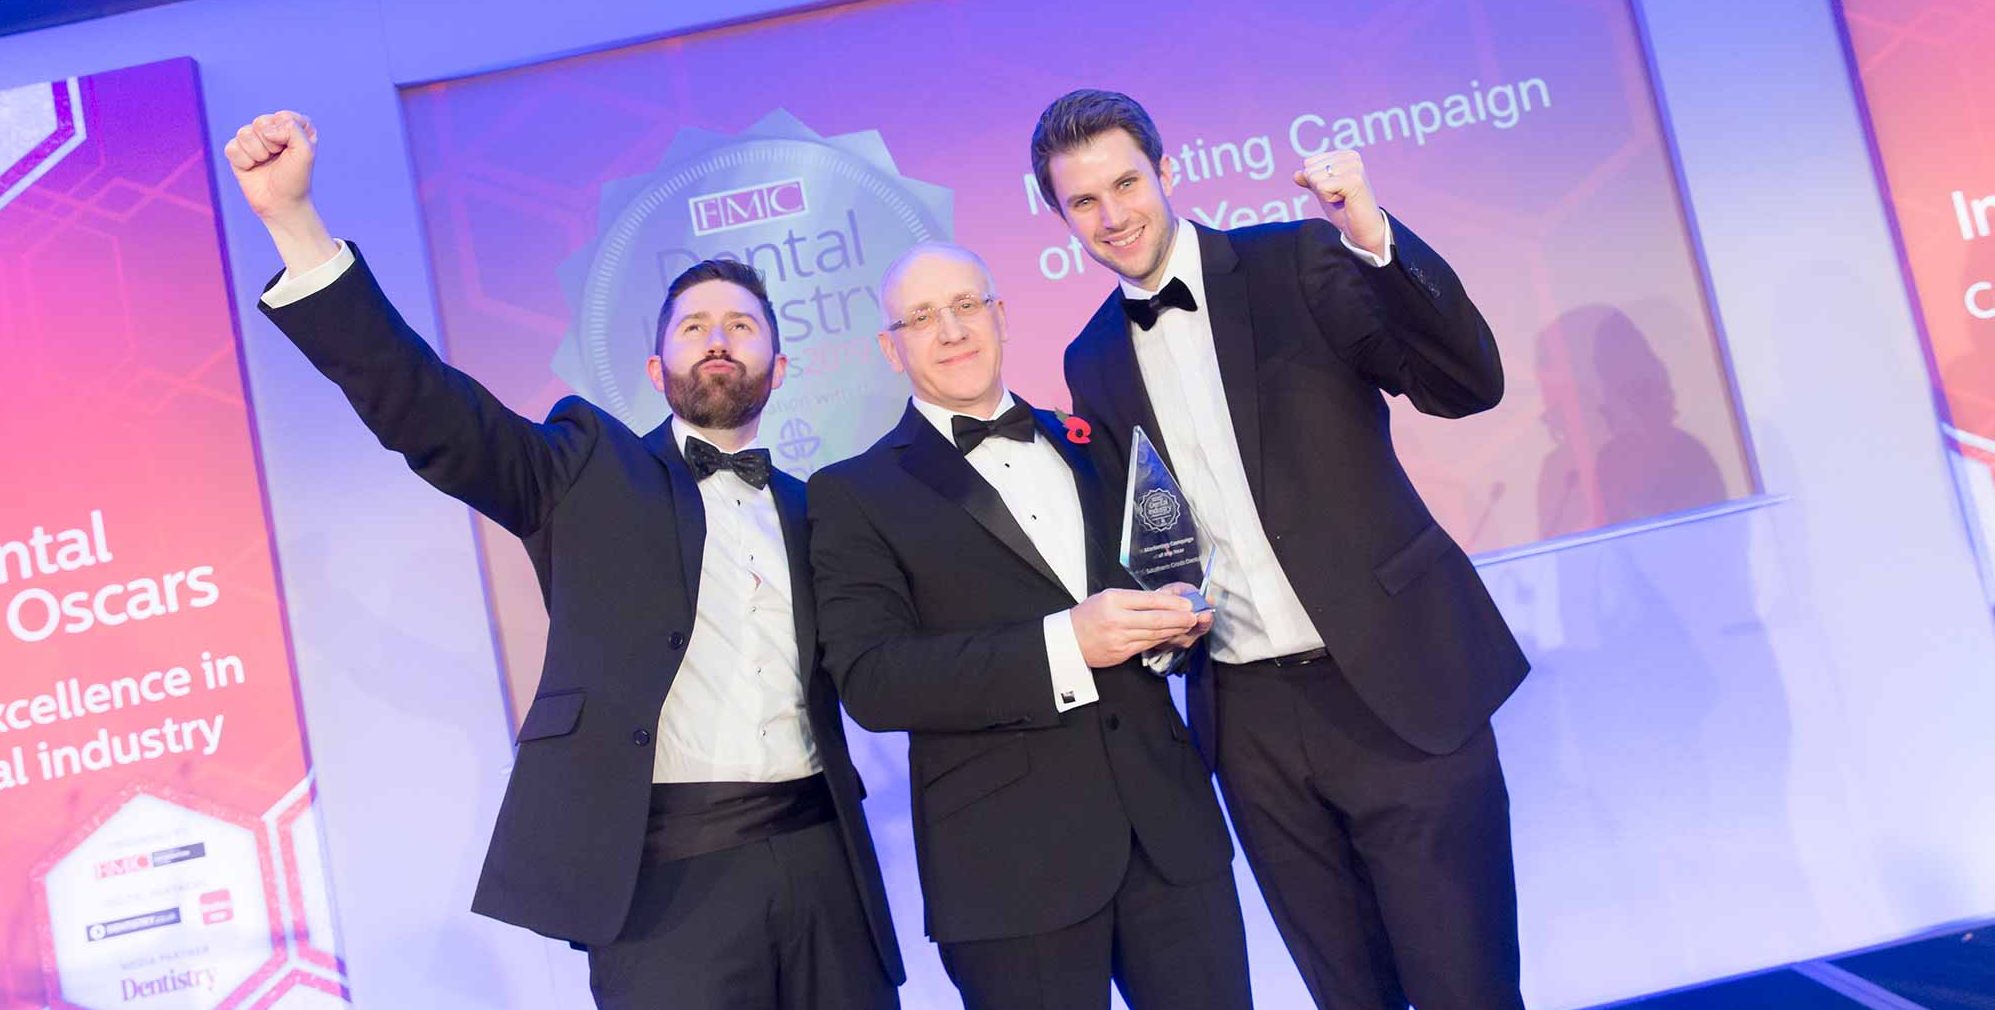 Dental Industry Awards 2019 Marketing Campaign of the Year